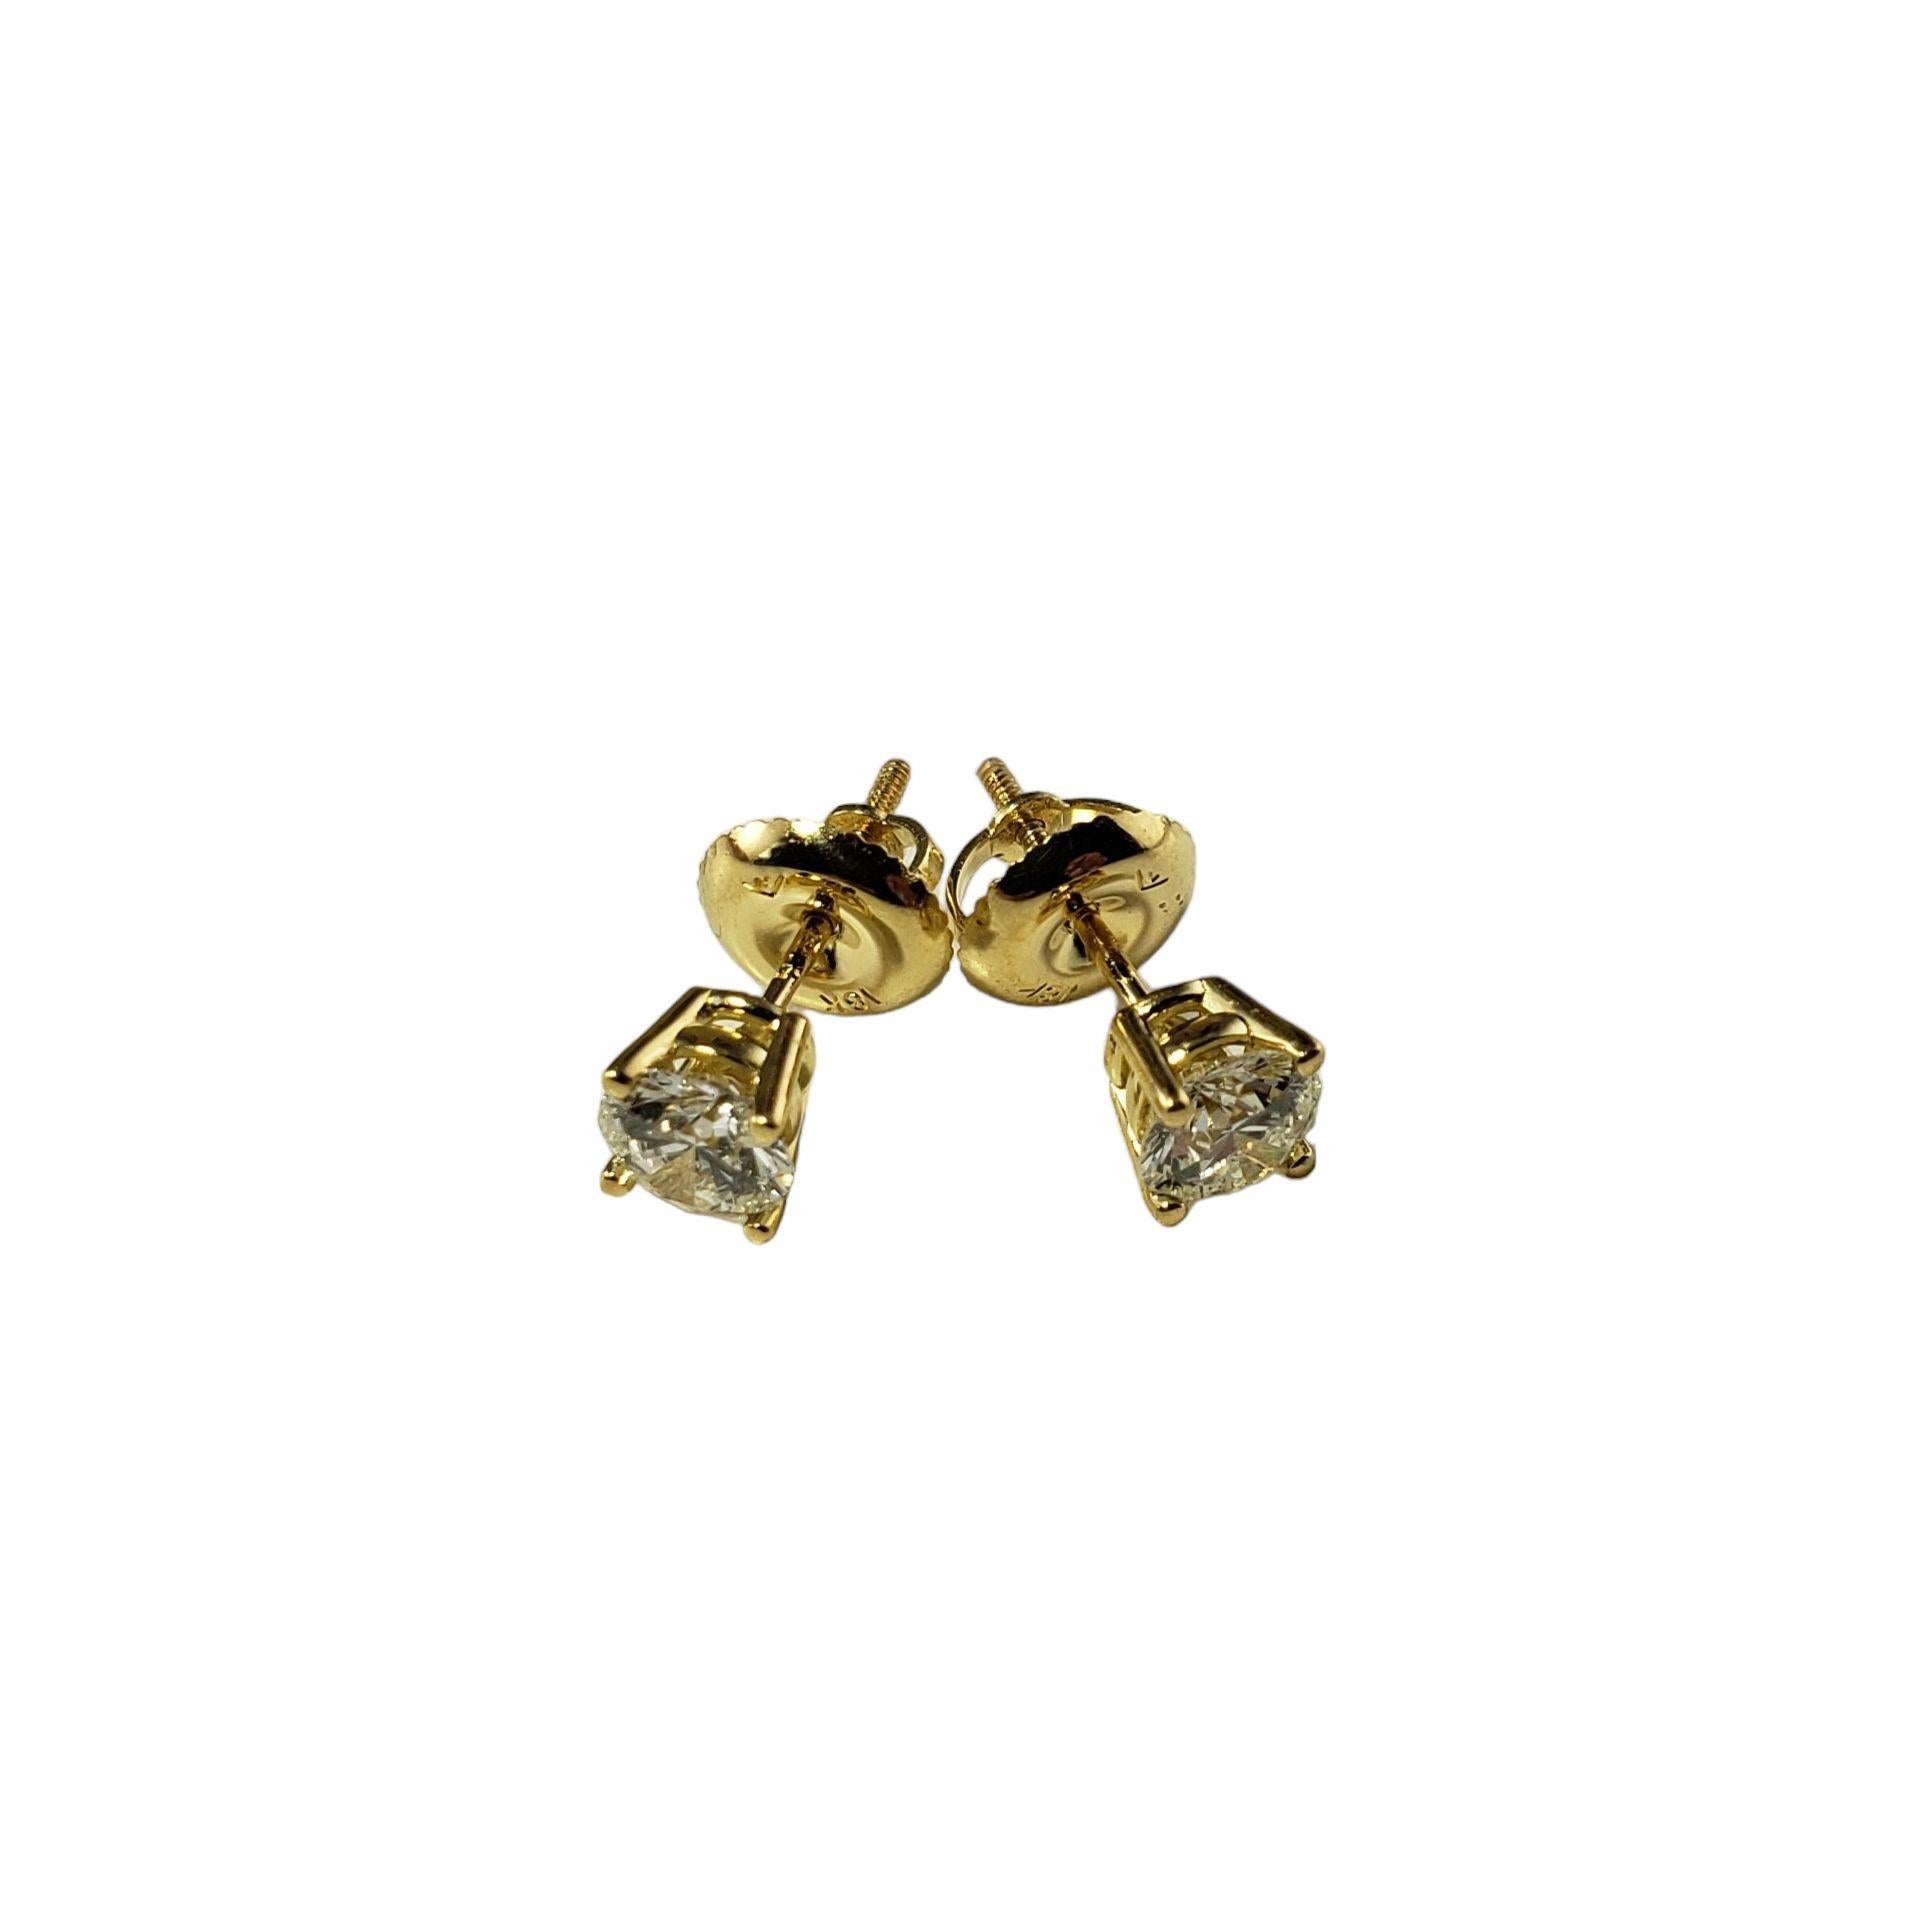 Vintage 18 Karat Yellow Gold Diamond Stud Earrings-

These sparkling stud earrings each feature one round brilliant cut diamond set in classic 18K yellow gold. Screw back closures.

Approximate total diamond weight: .70 ct.

Diamond color: